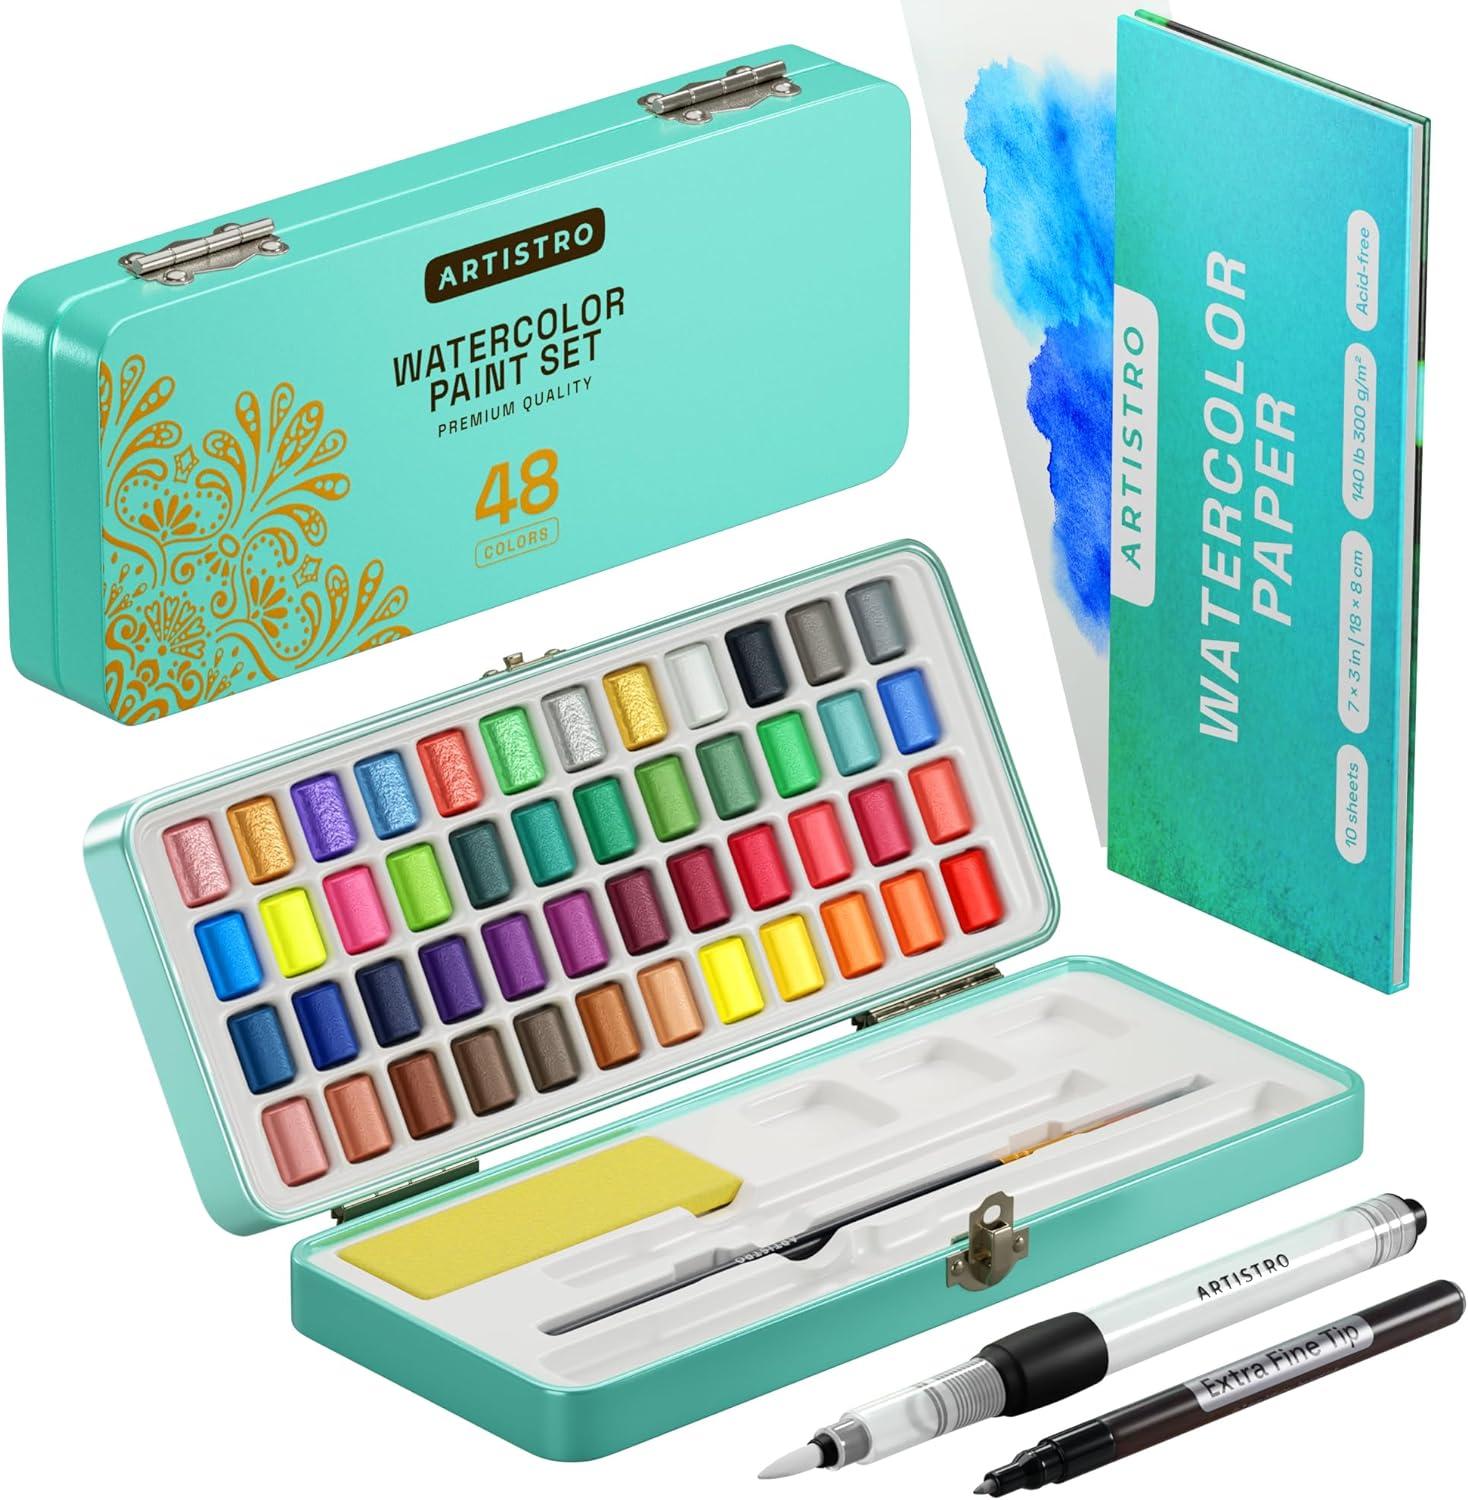 artistro watercolor paint set 48 vivid colors in portable box including metallic and fluorescent colors